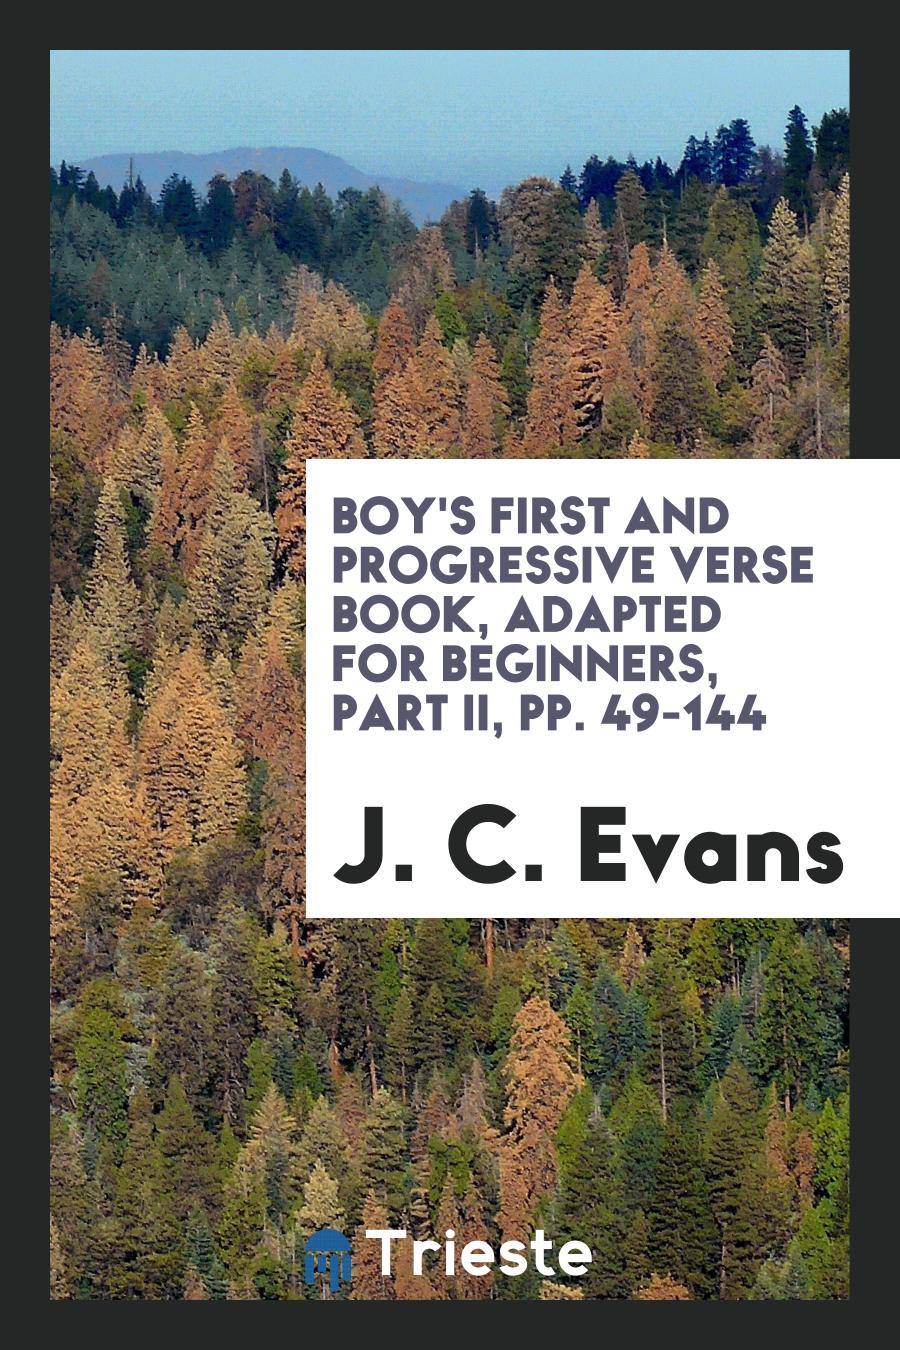 Boy's First and Progressive Verse Book, Adapted for Beginners, Part II, pp. 49-144